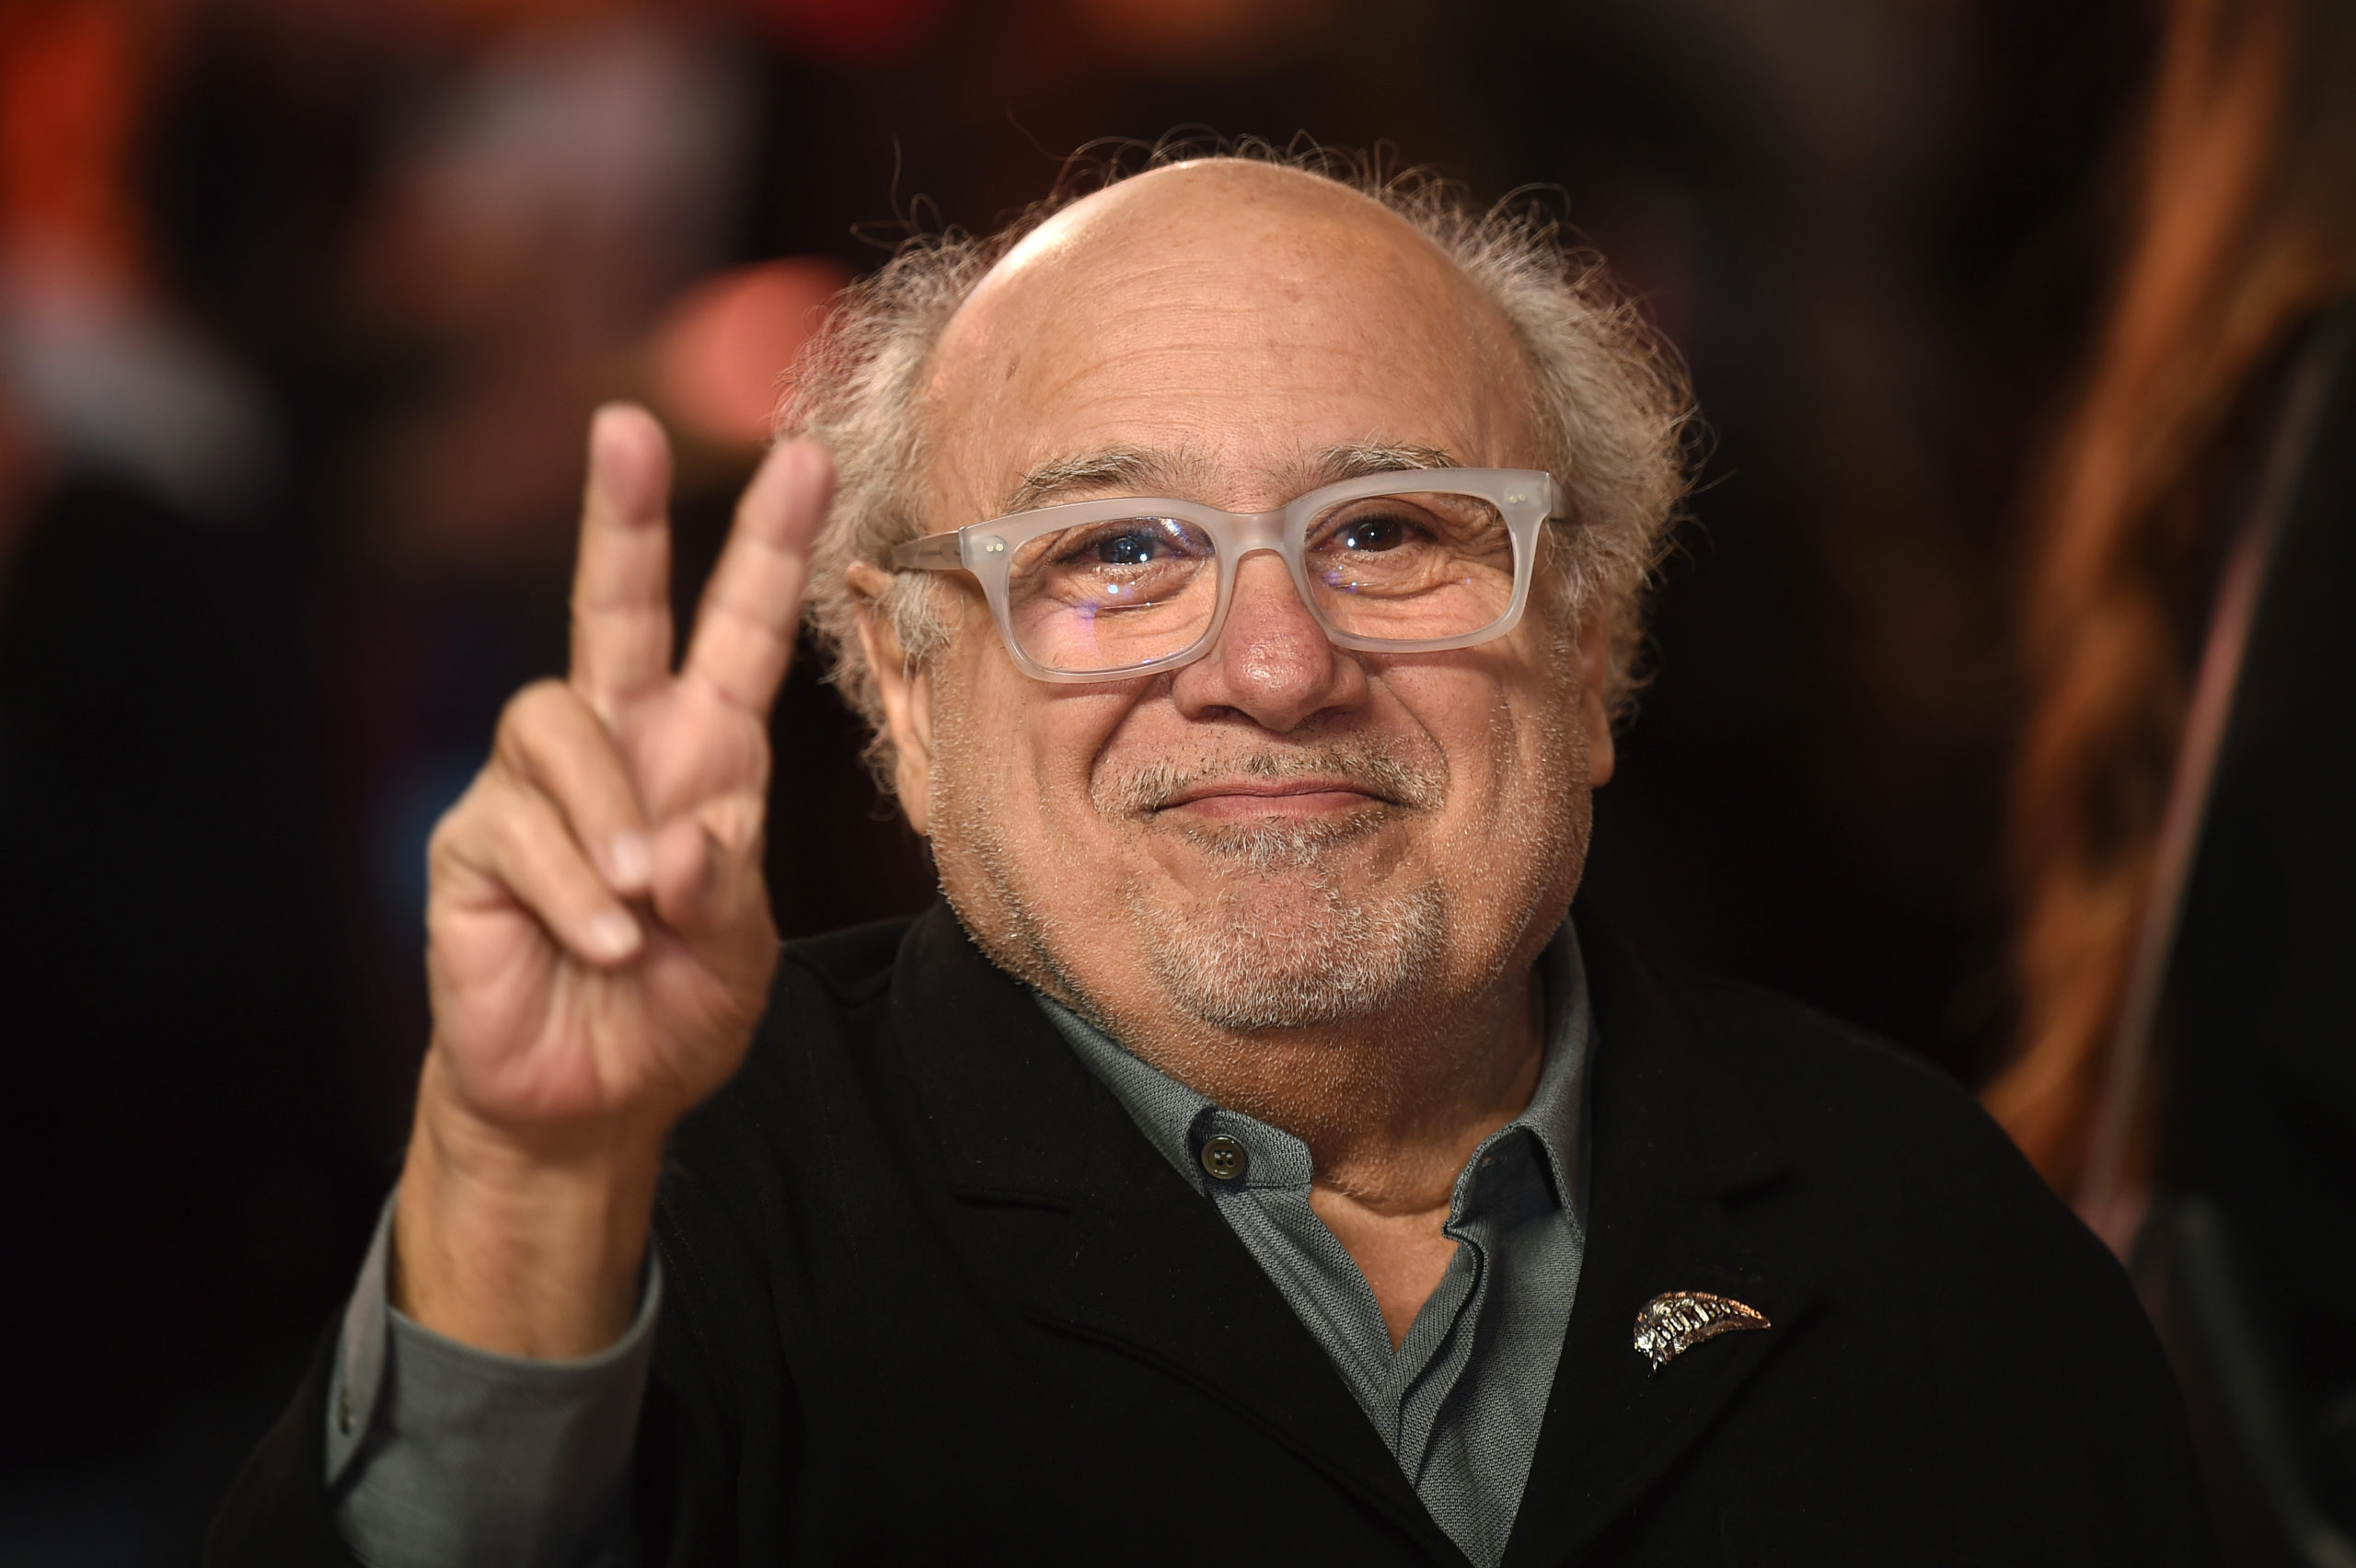 Danny Devito attends the 'Dumbo' European premiere at The Curzon Mayfair on March 21, 2019 in London, England. (Photo by Stuart C. Wilson/Getty Images)